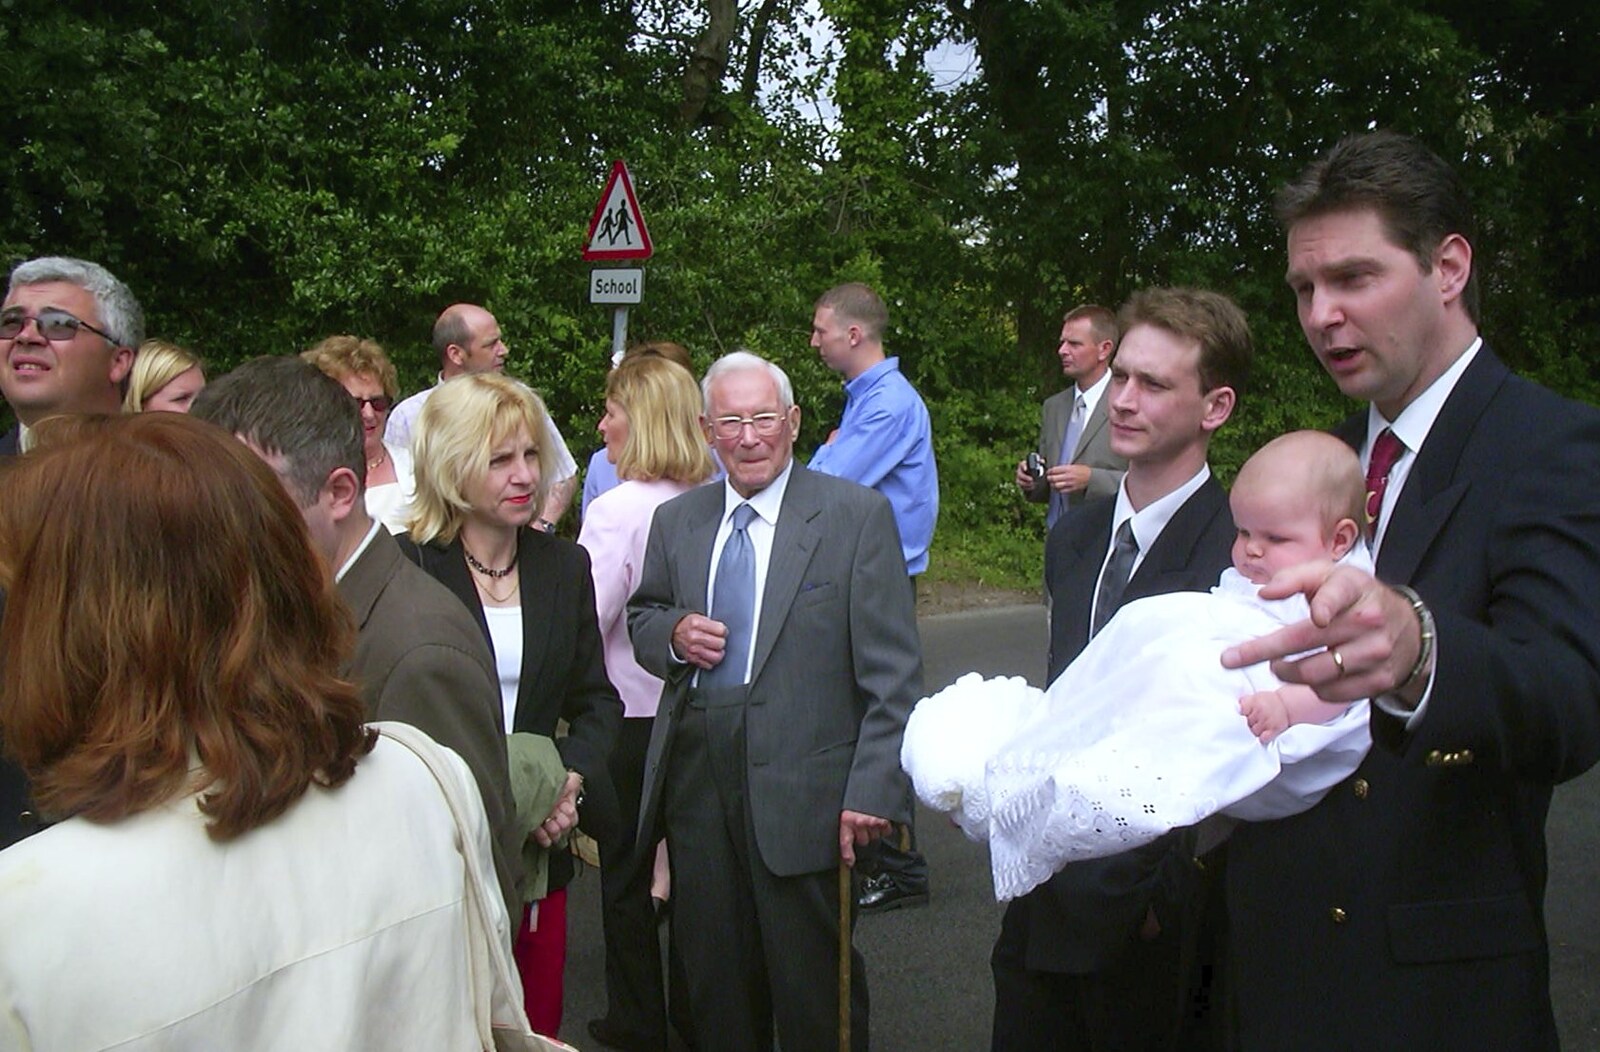 Sean points as people mingle around from Sydney's Christening, Hordle, Hampshire - 4th May 2002